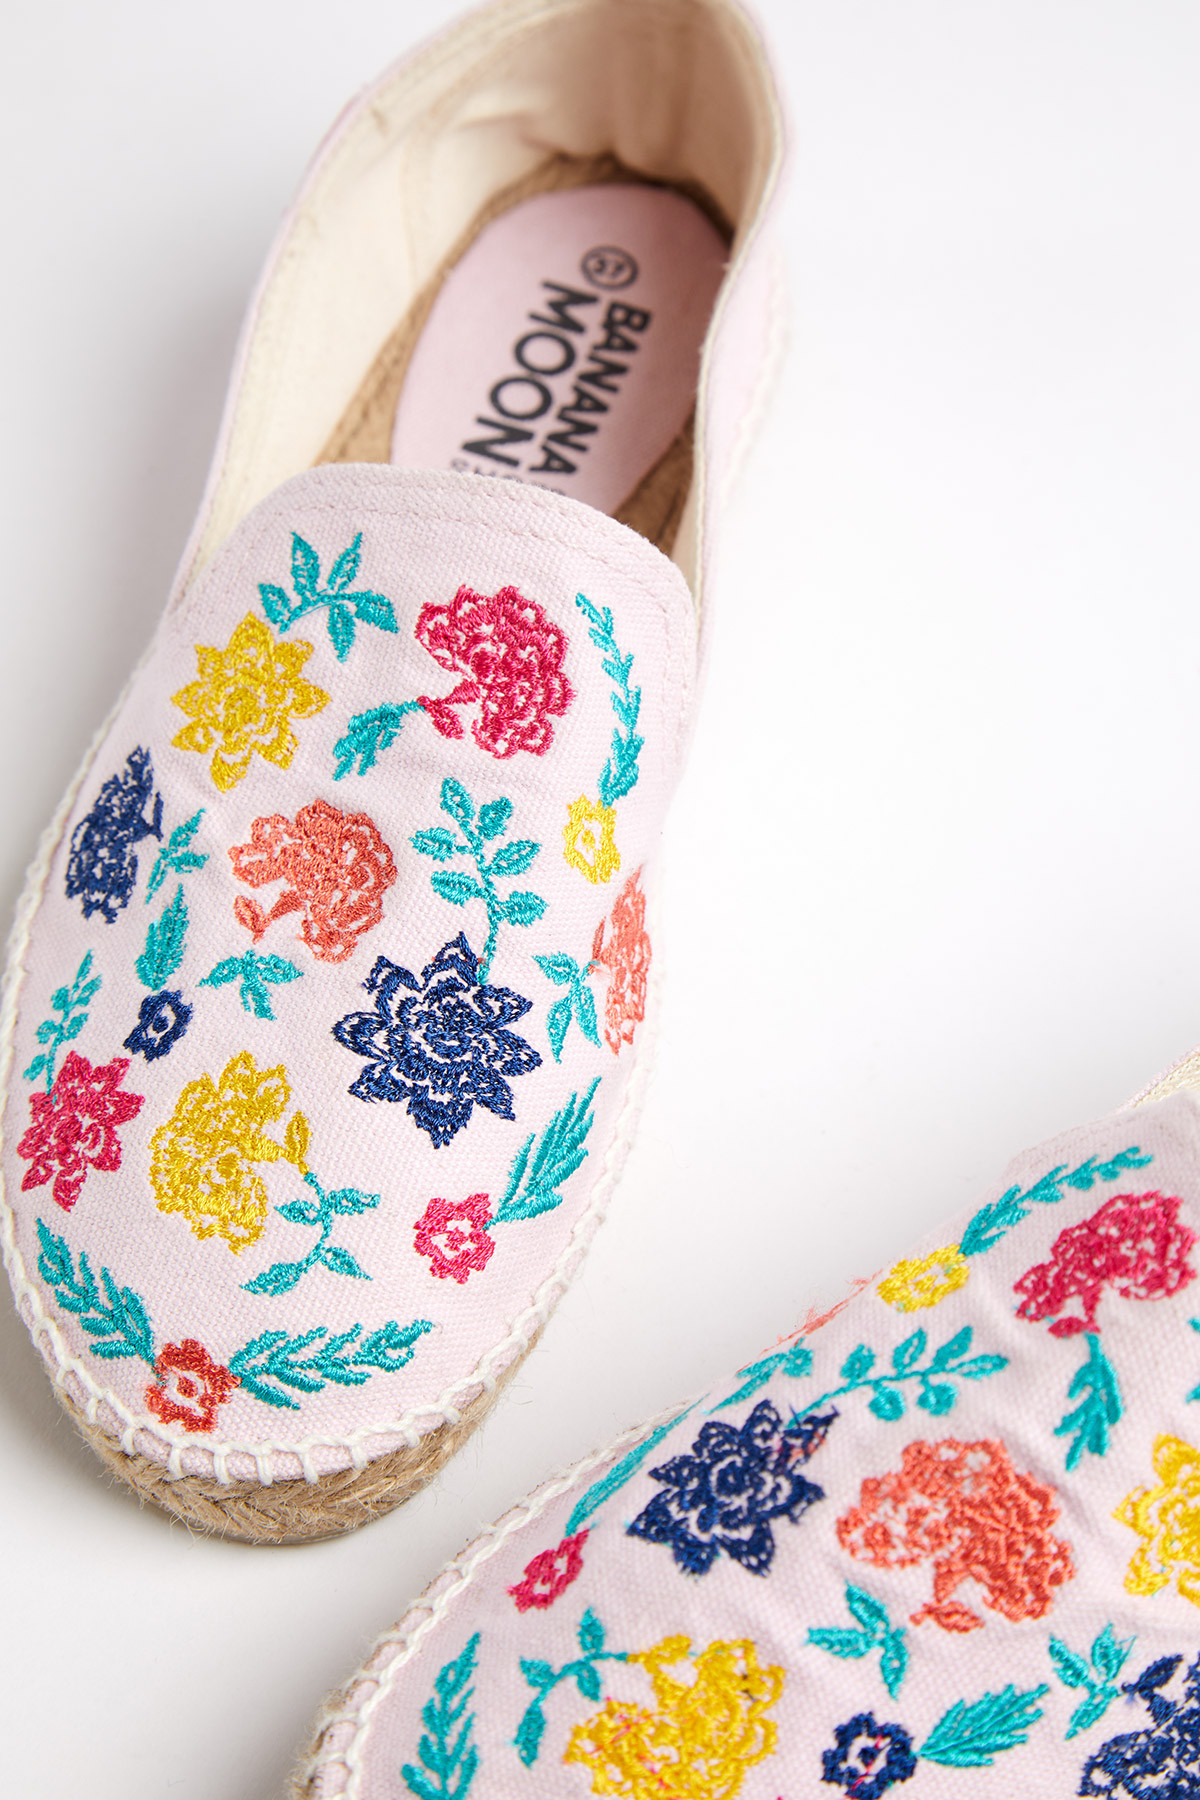 ESPADRILLE pink espadrilles with floral embroidery